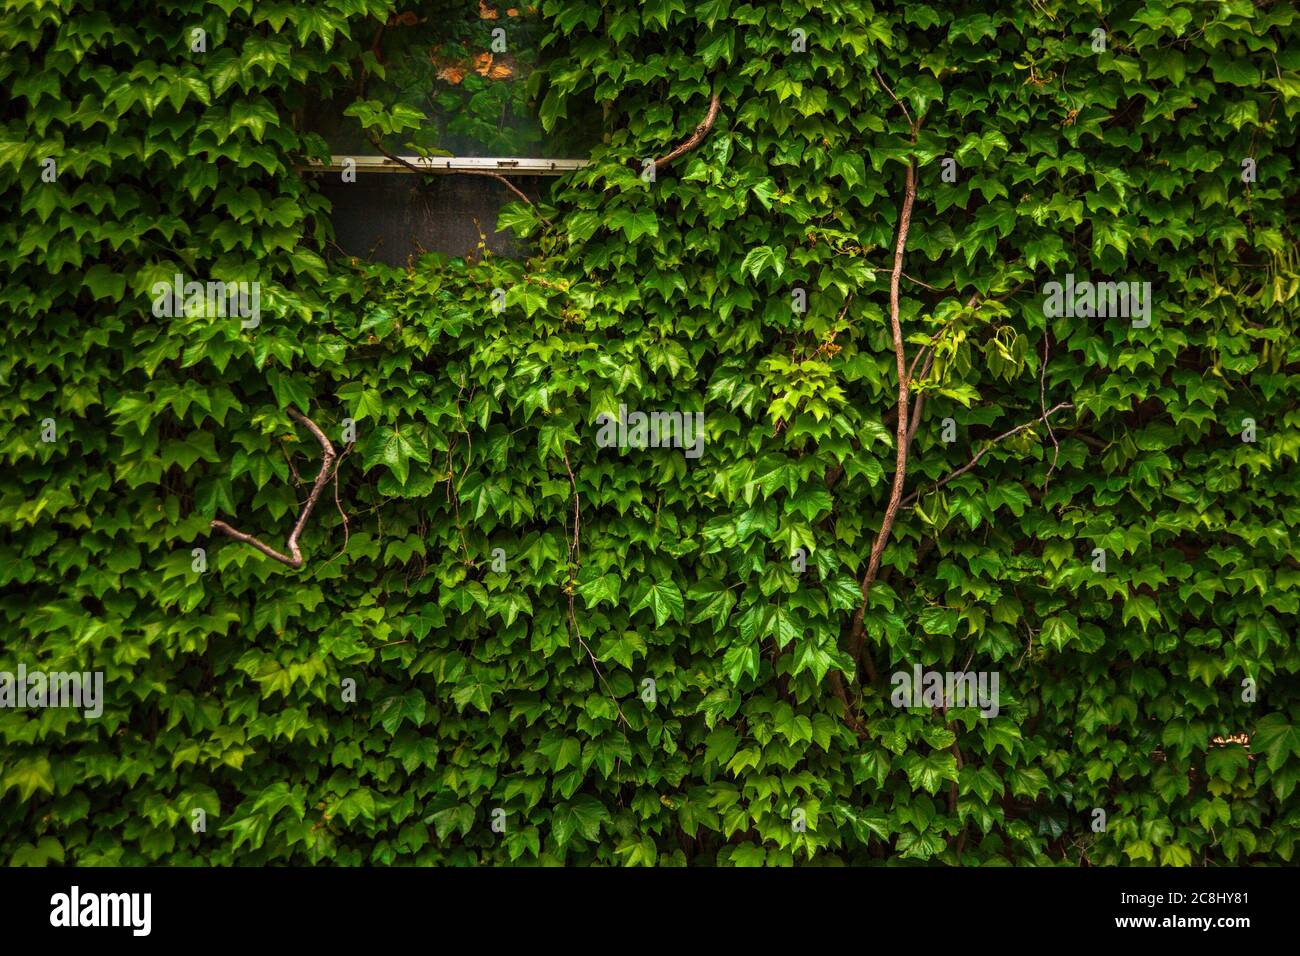 Ivy wall background Stock Photo